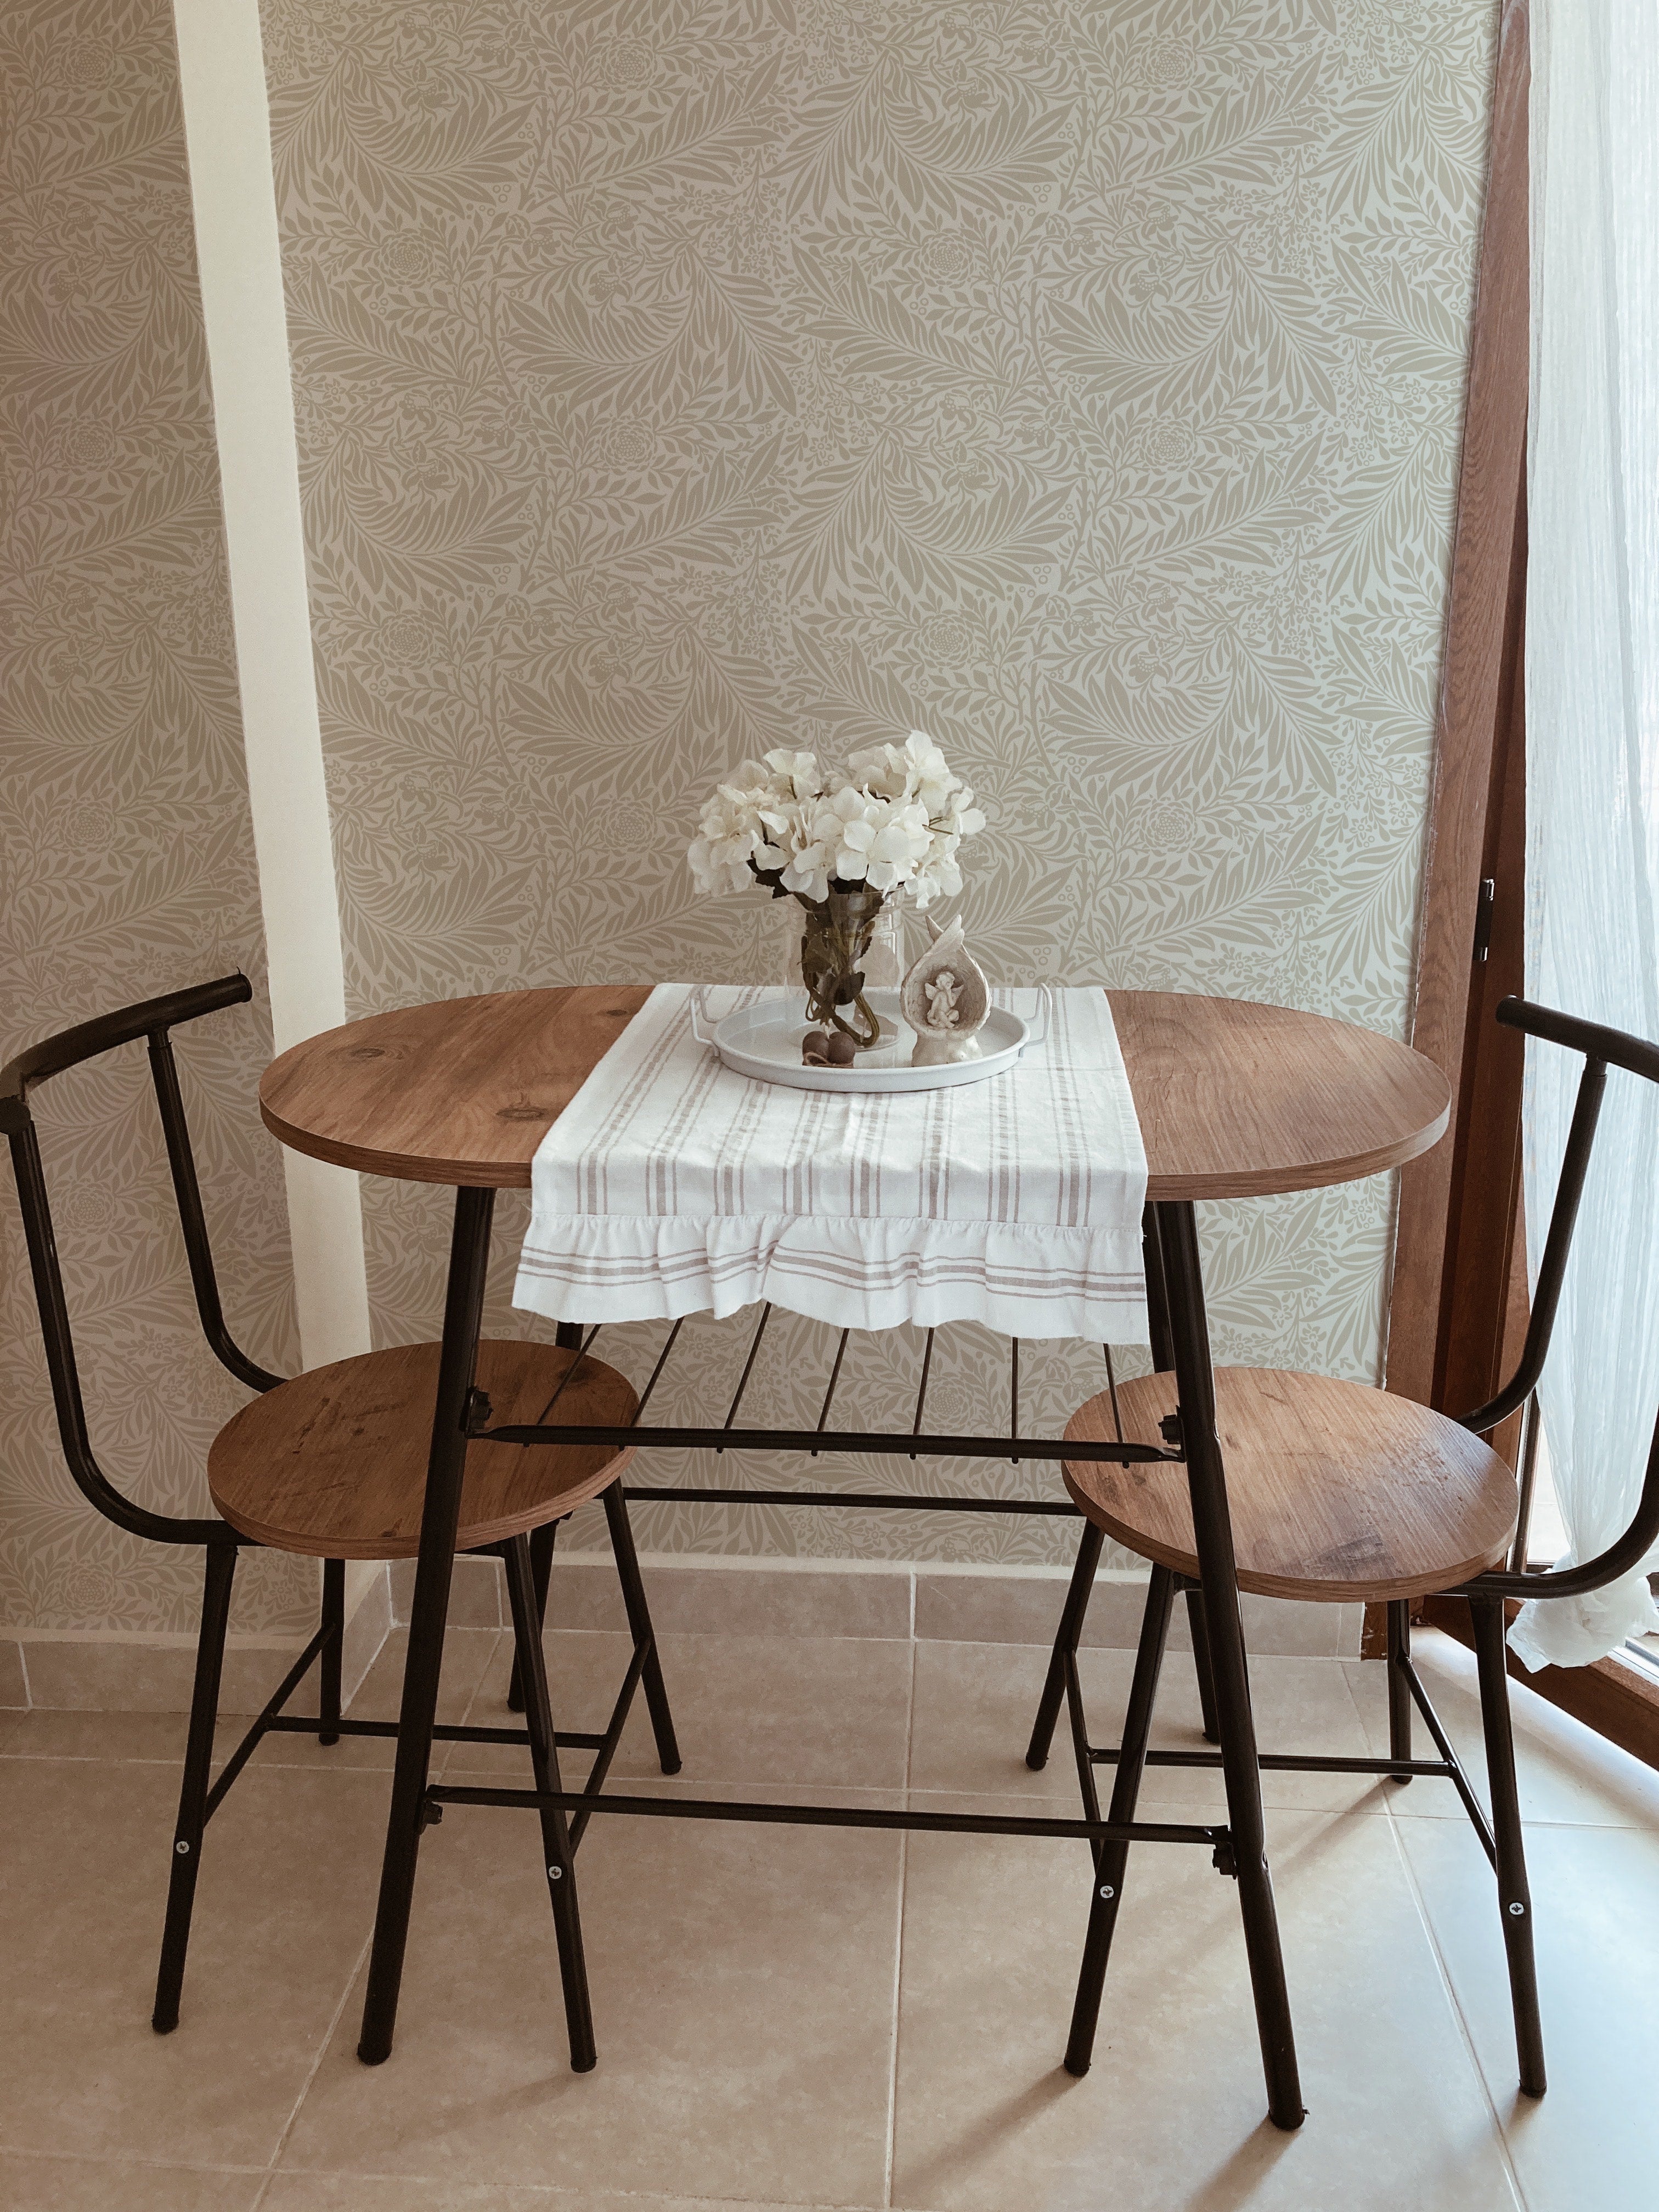  quaint dining area graced by the 'William Bough Wallpaper', featuring a round wooden table with black chairs, set under a simple white cloth and a vase of white flowers